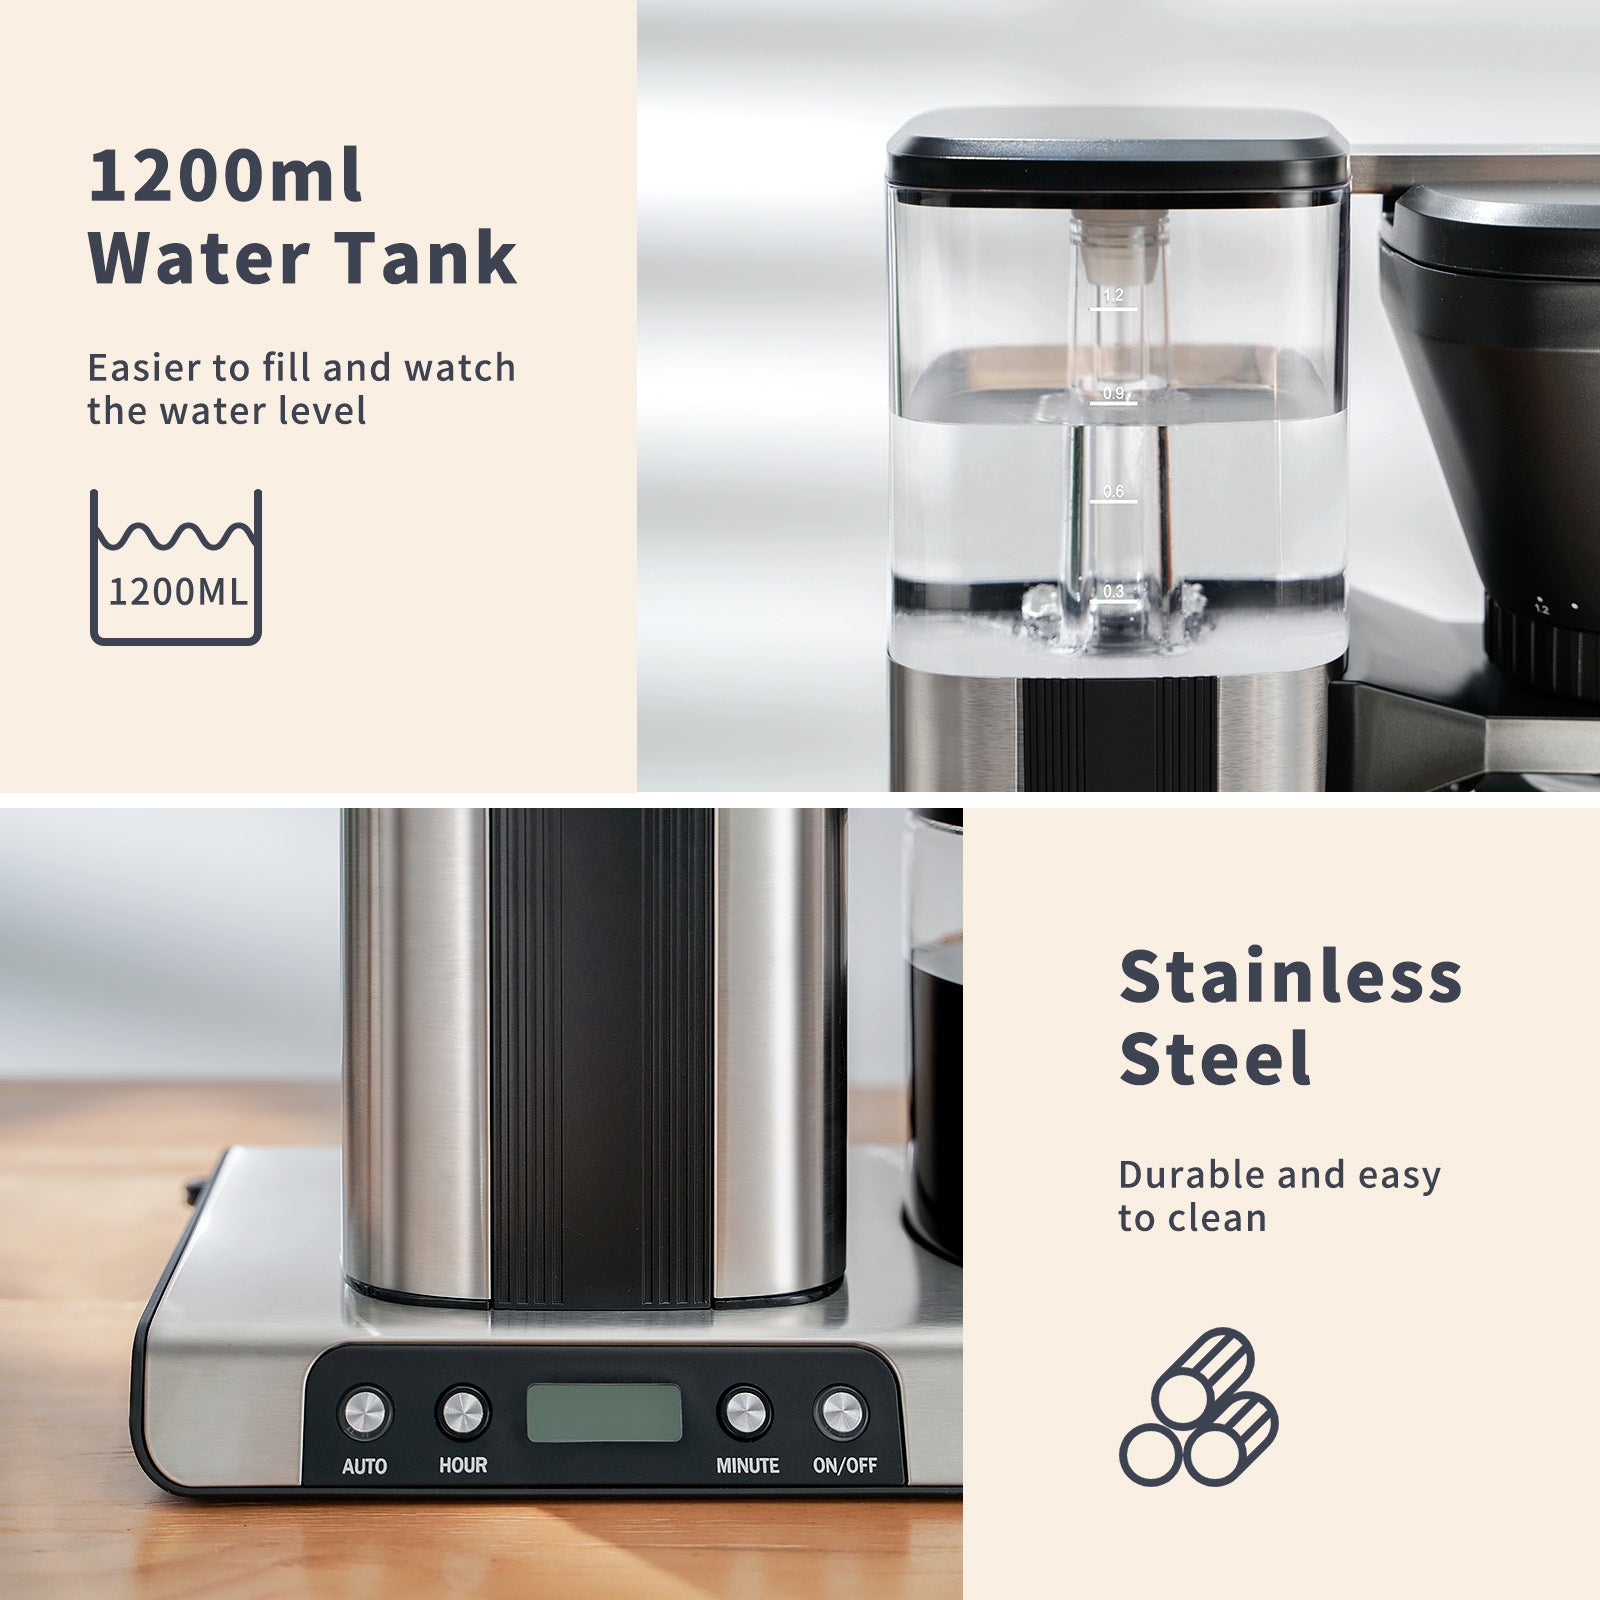 Drip Coffee Maker with Stainless Steel – Maestri House